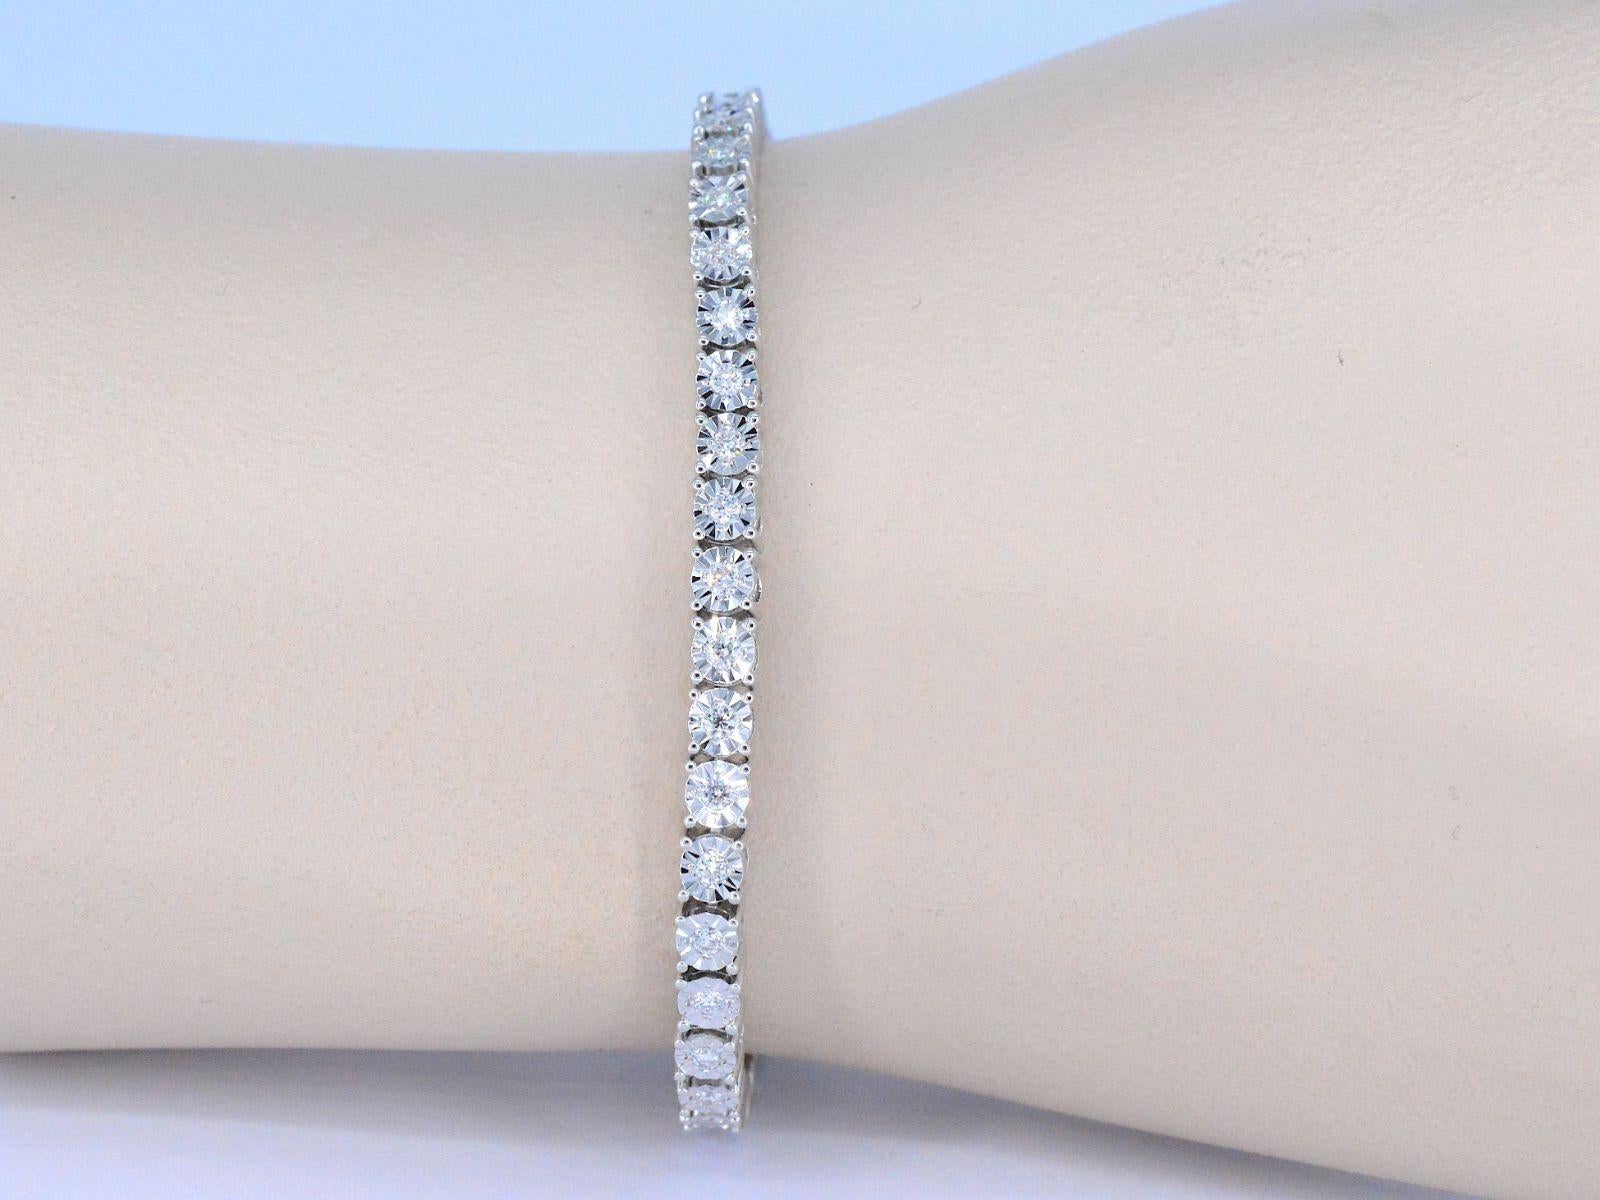 This white gold tennis bracelet with diamonds is a stunning piece of jewelry that is sure to make a statement. Featuring 1.20 carats of brilliant cut diamonds, this bracelet sparkles and shines from every angle. The diamonds have a F-G color and